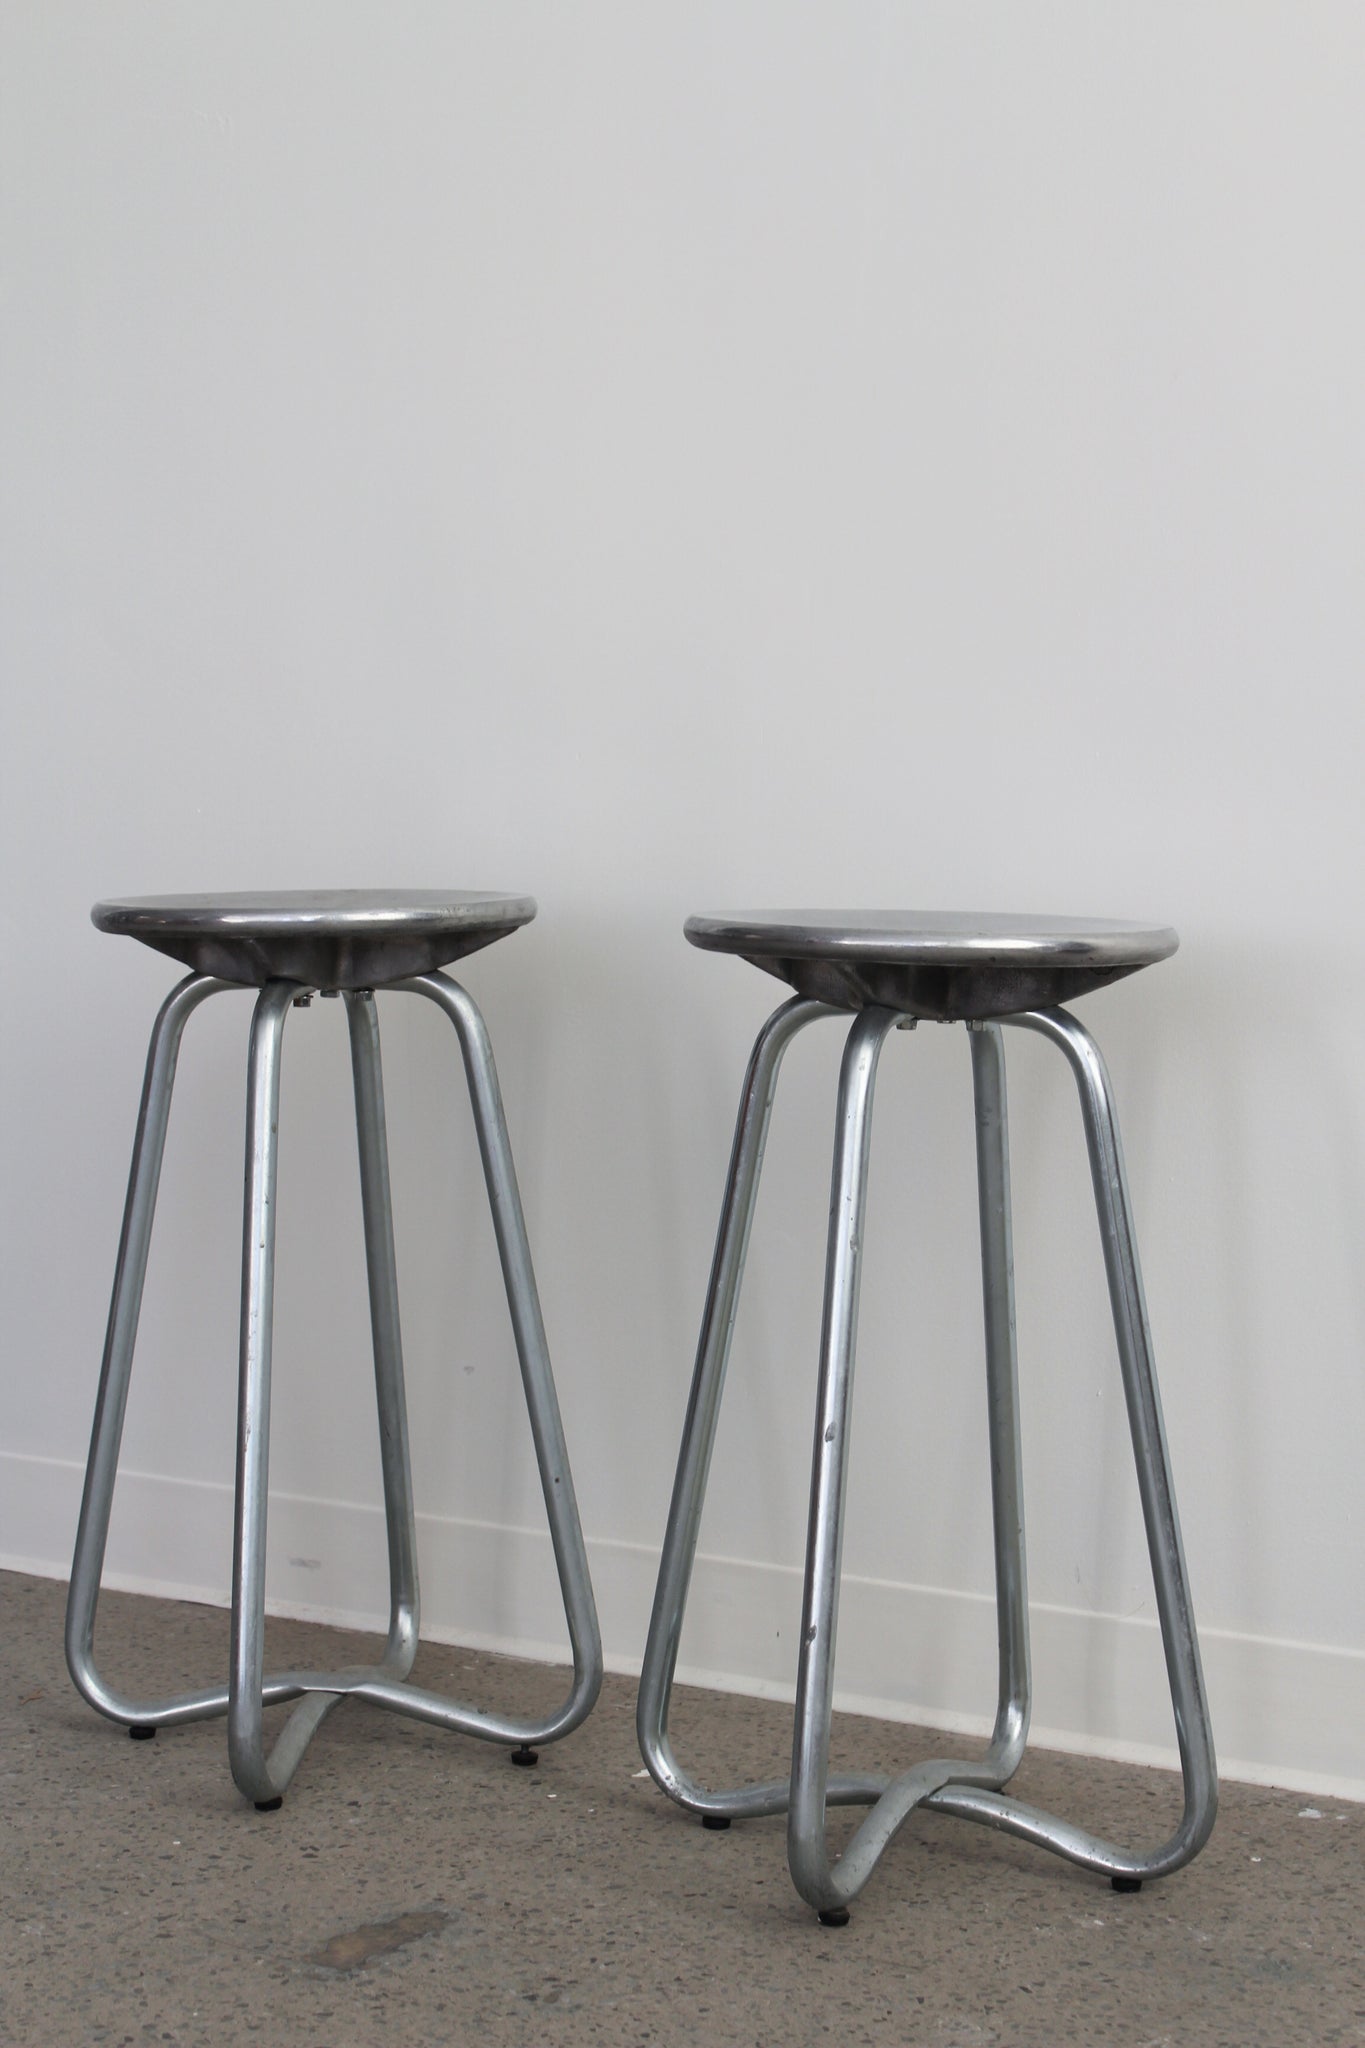 Brushed Steel Stools by Terrence Conran for Habitat